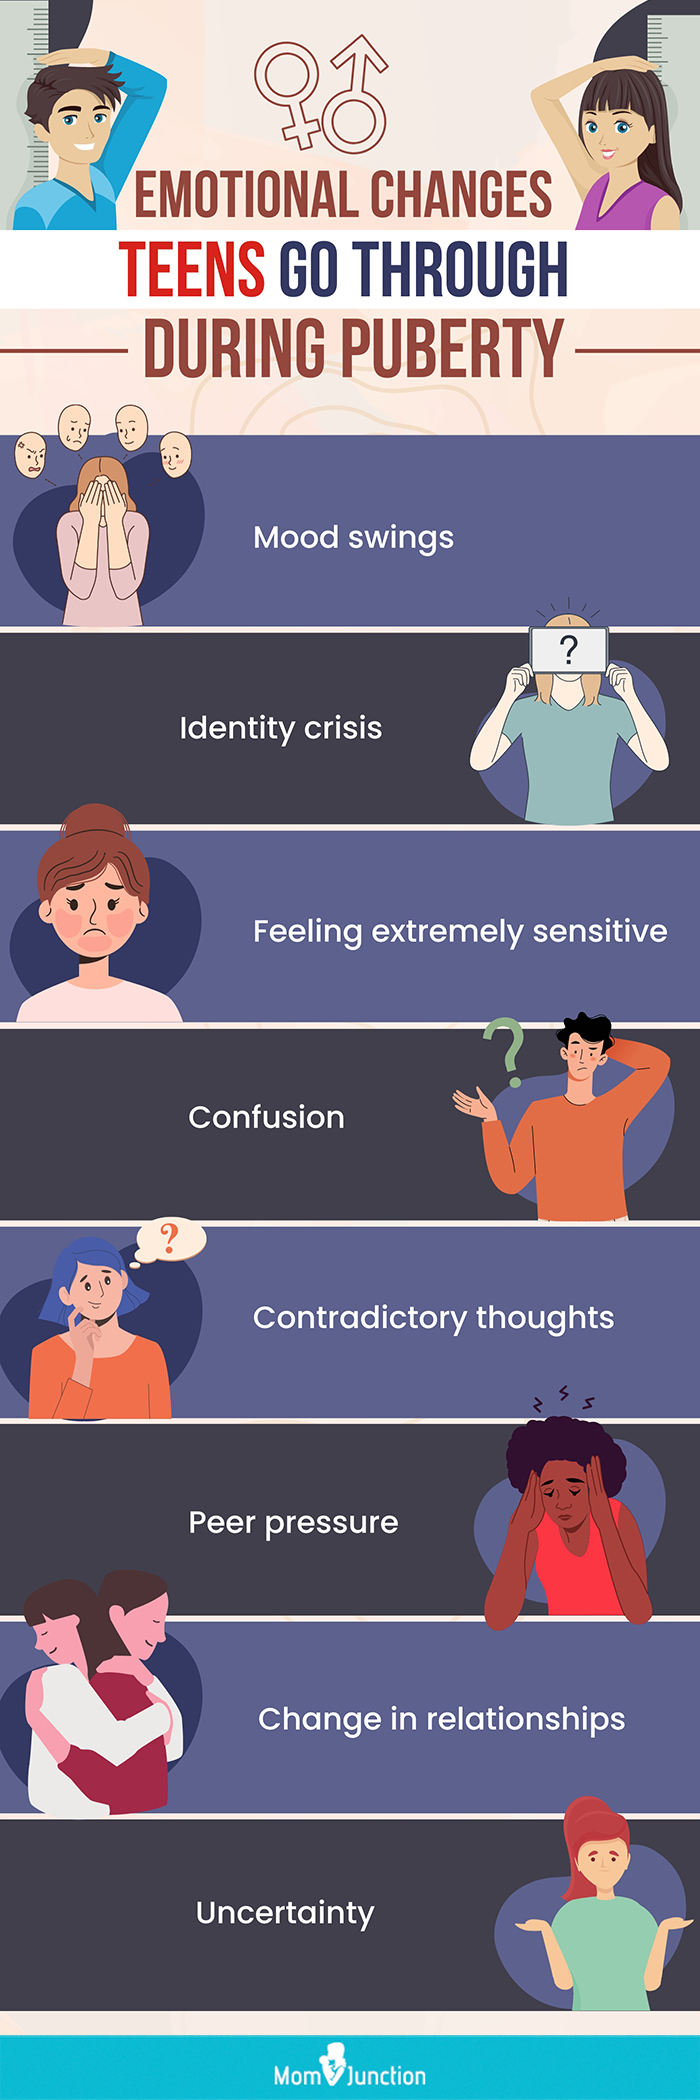 puberty is an emotional rollercoaster (infographic)